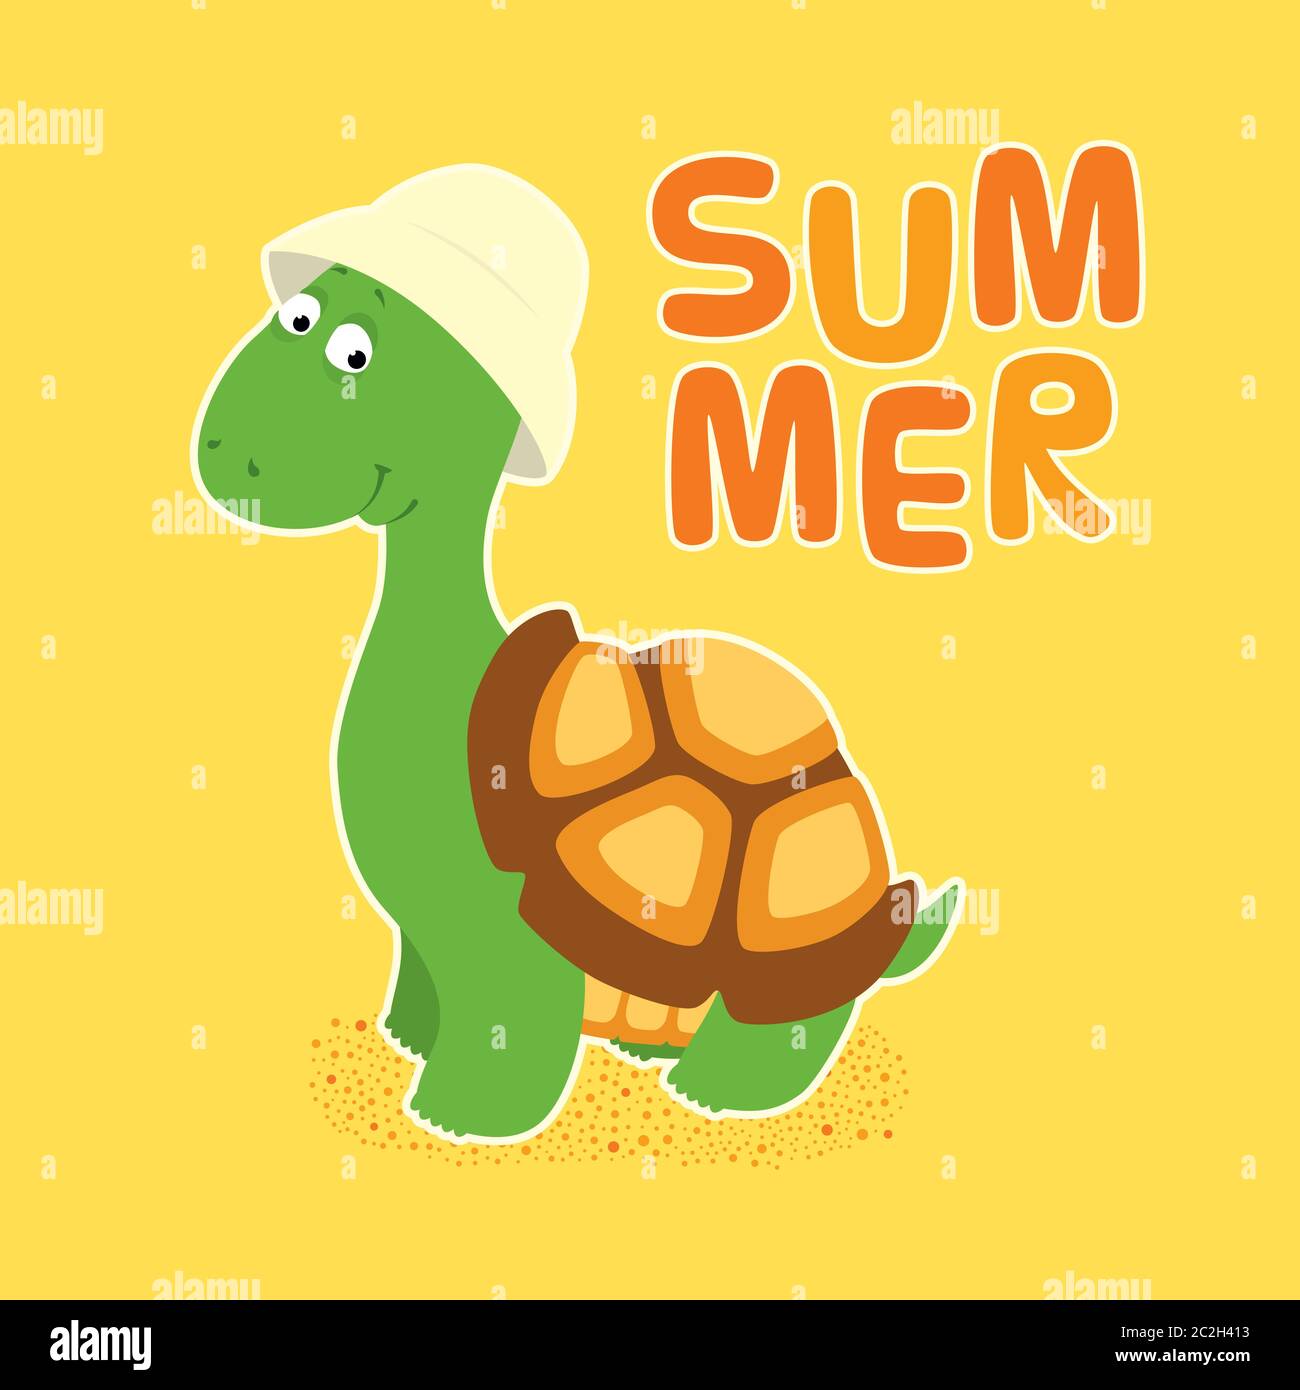 Vector colorful illustration in childish style. Cartoon cute little turtle in a creamy bucket hat standing, looking friendly and smiling. Stock Vector